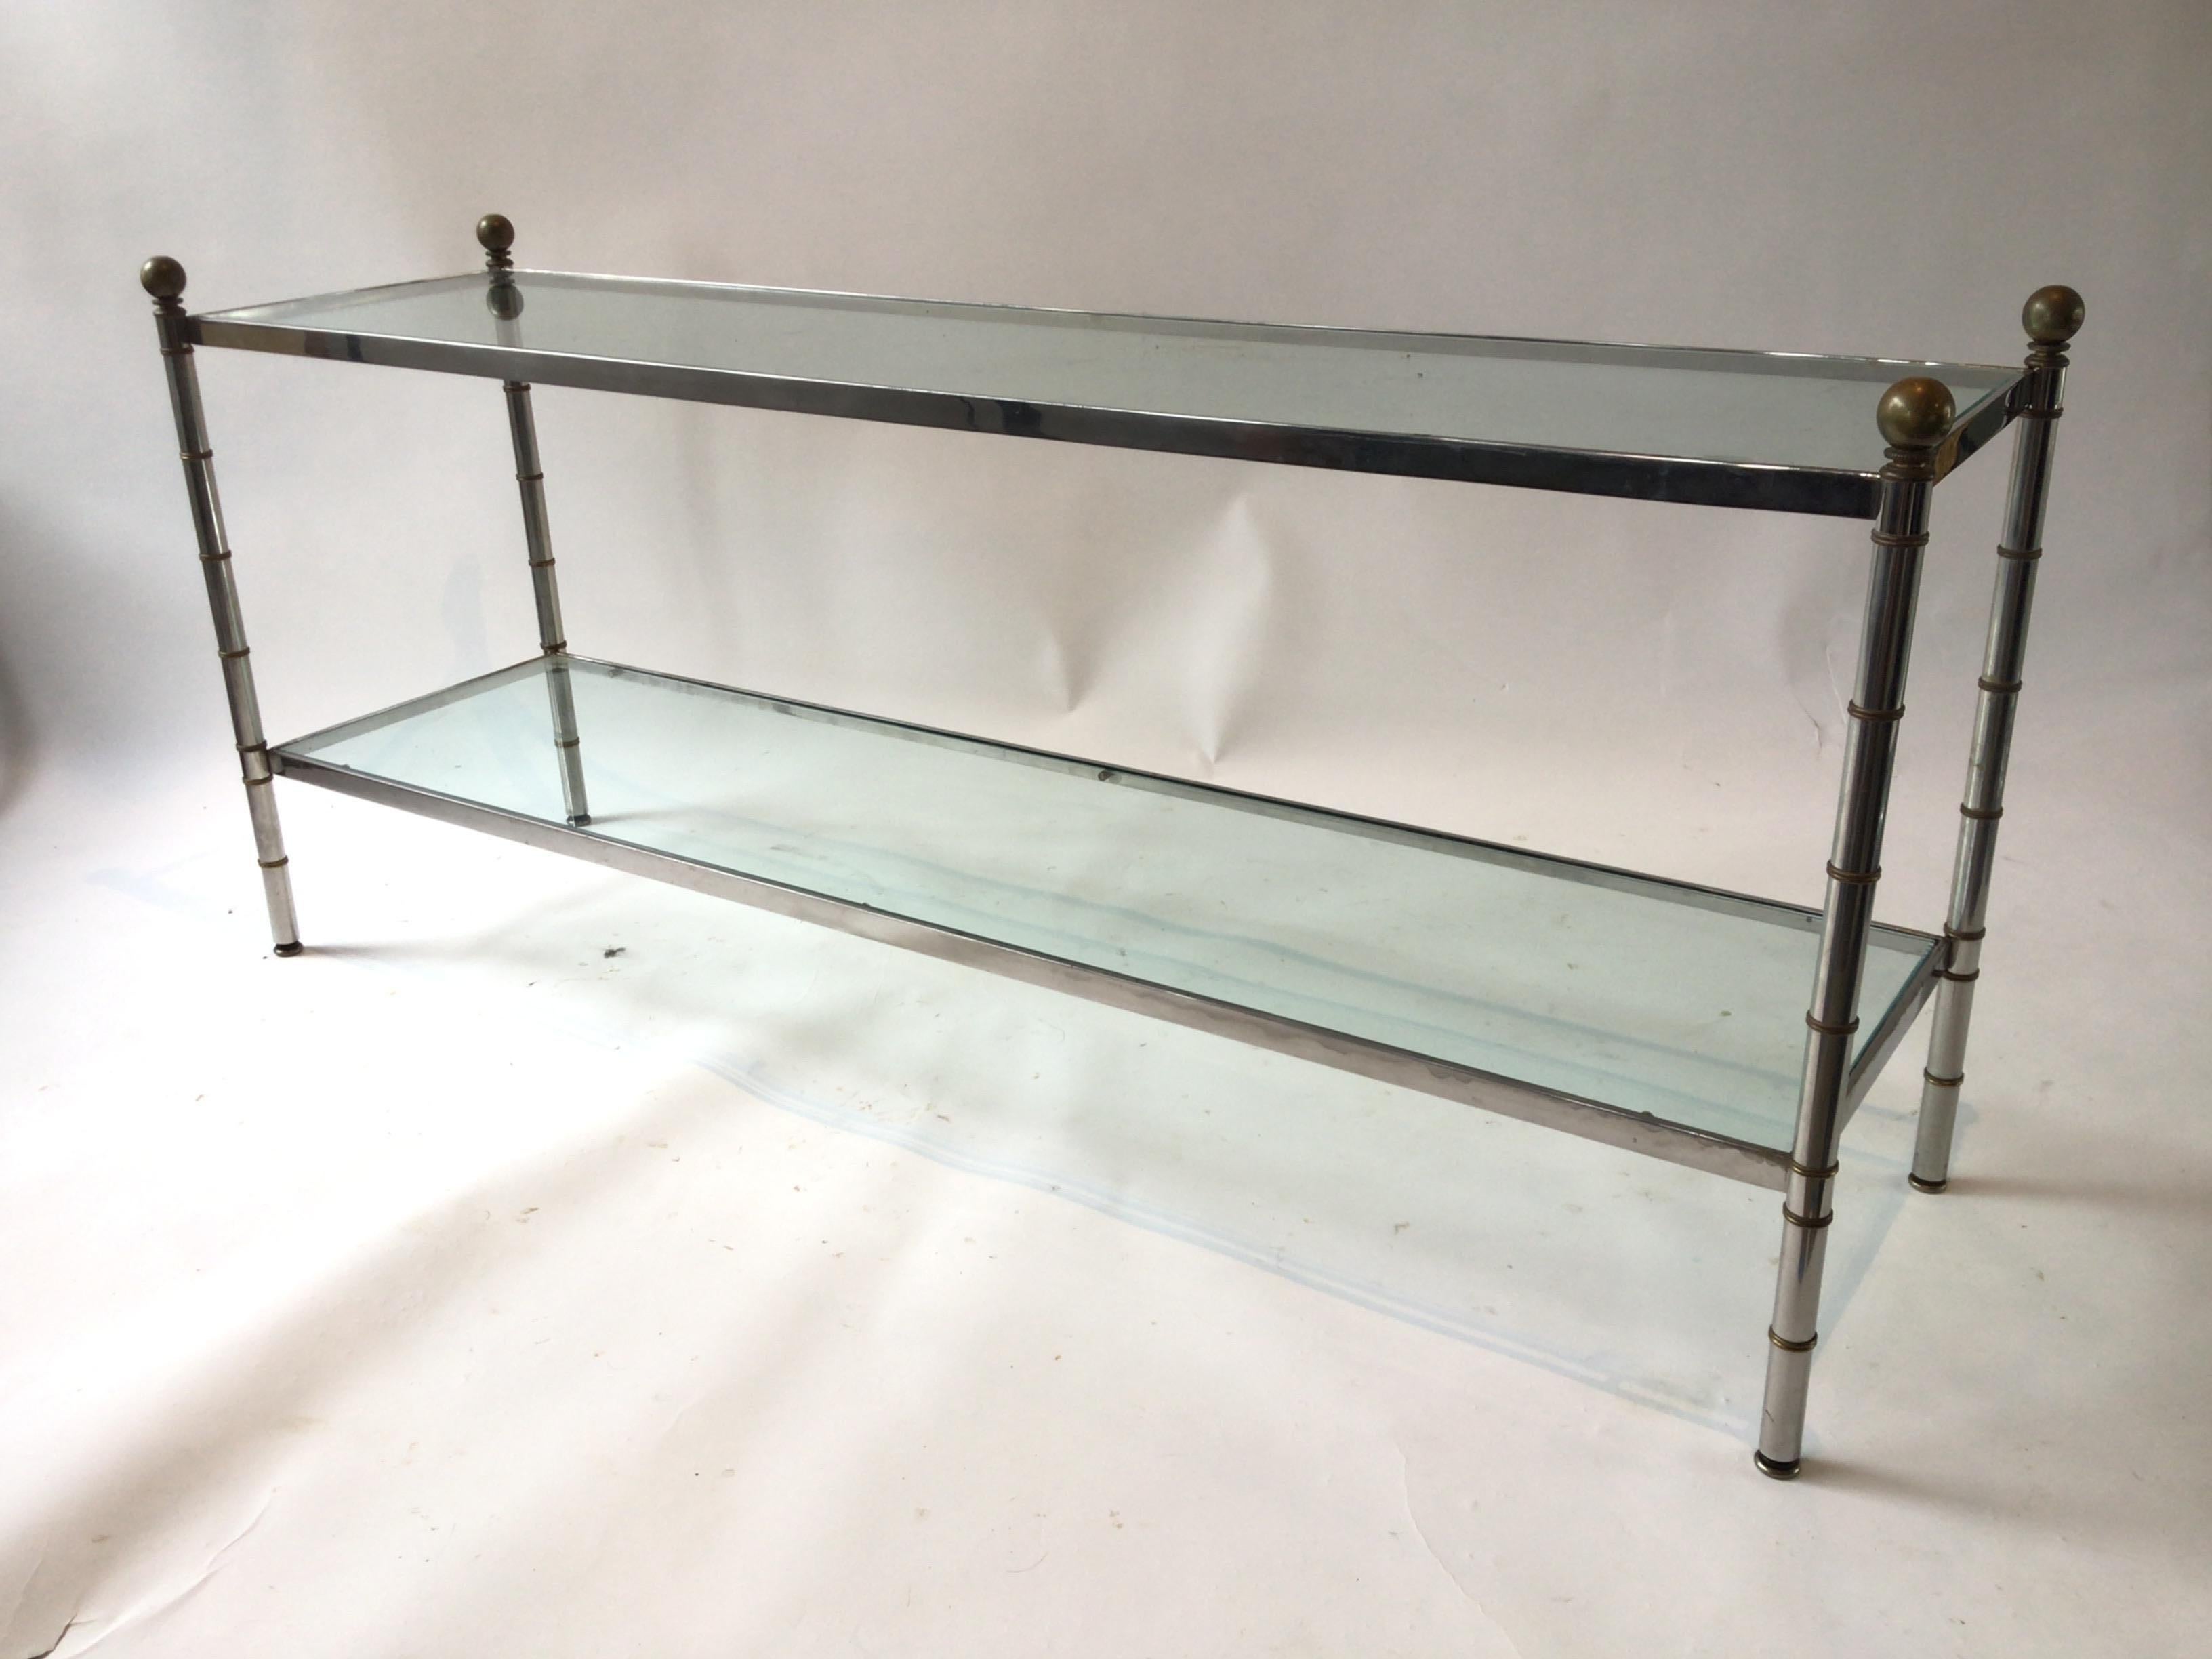 1980s Chrome and brass faux bamboo console with glass shelves.